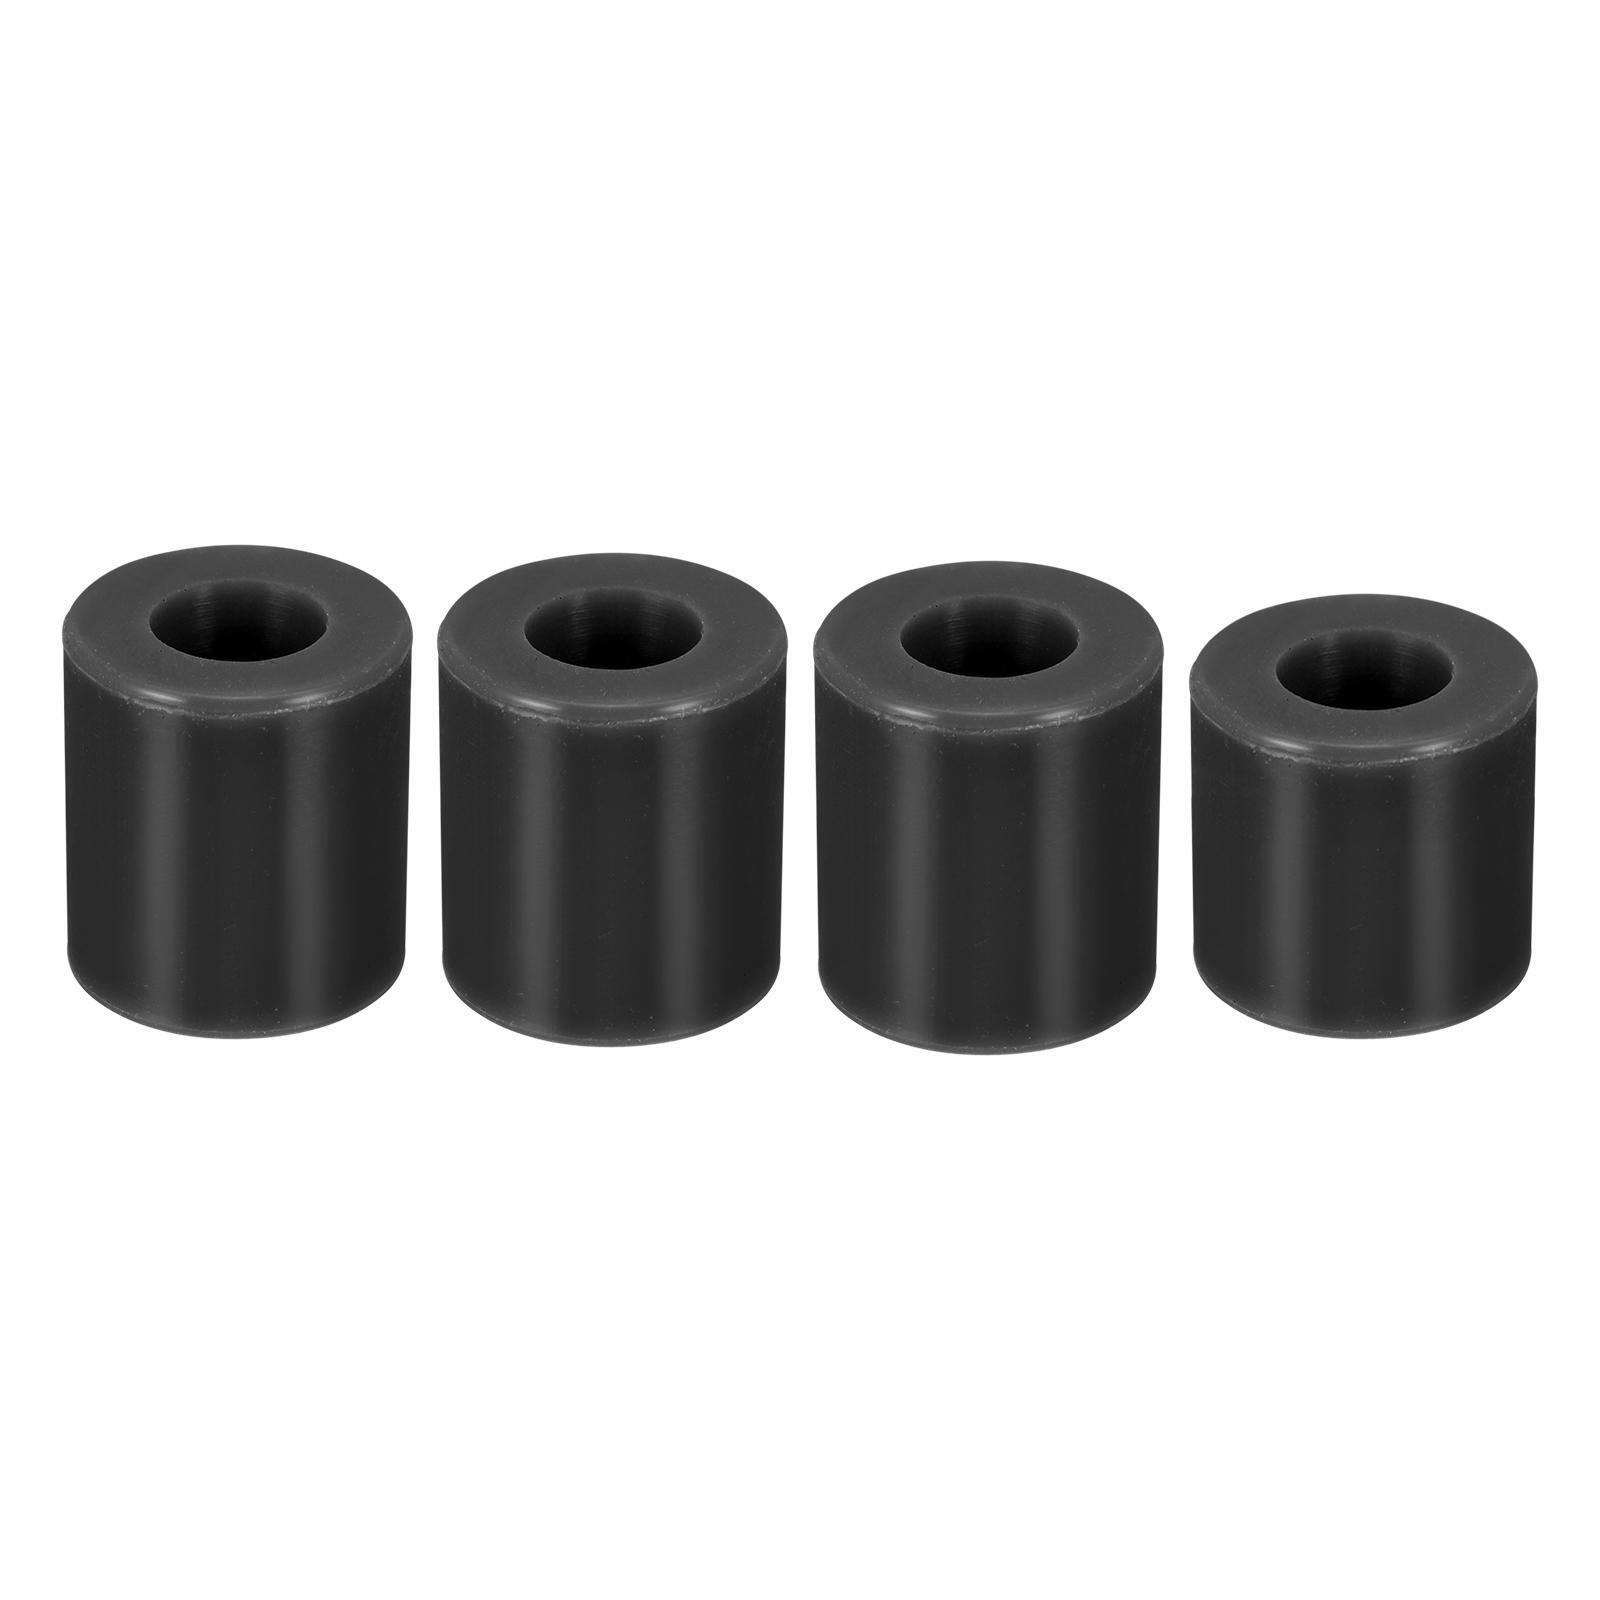 16mm/18mm 3D Printer Heat Bed Parts, Silicone Solid Bed Mounts,Black 1set